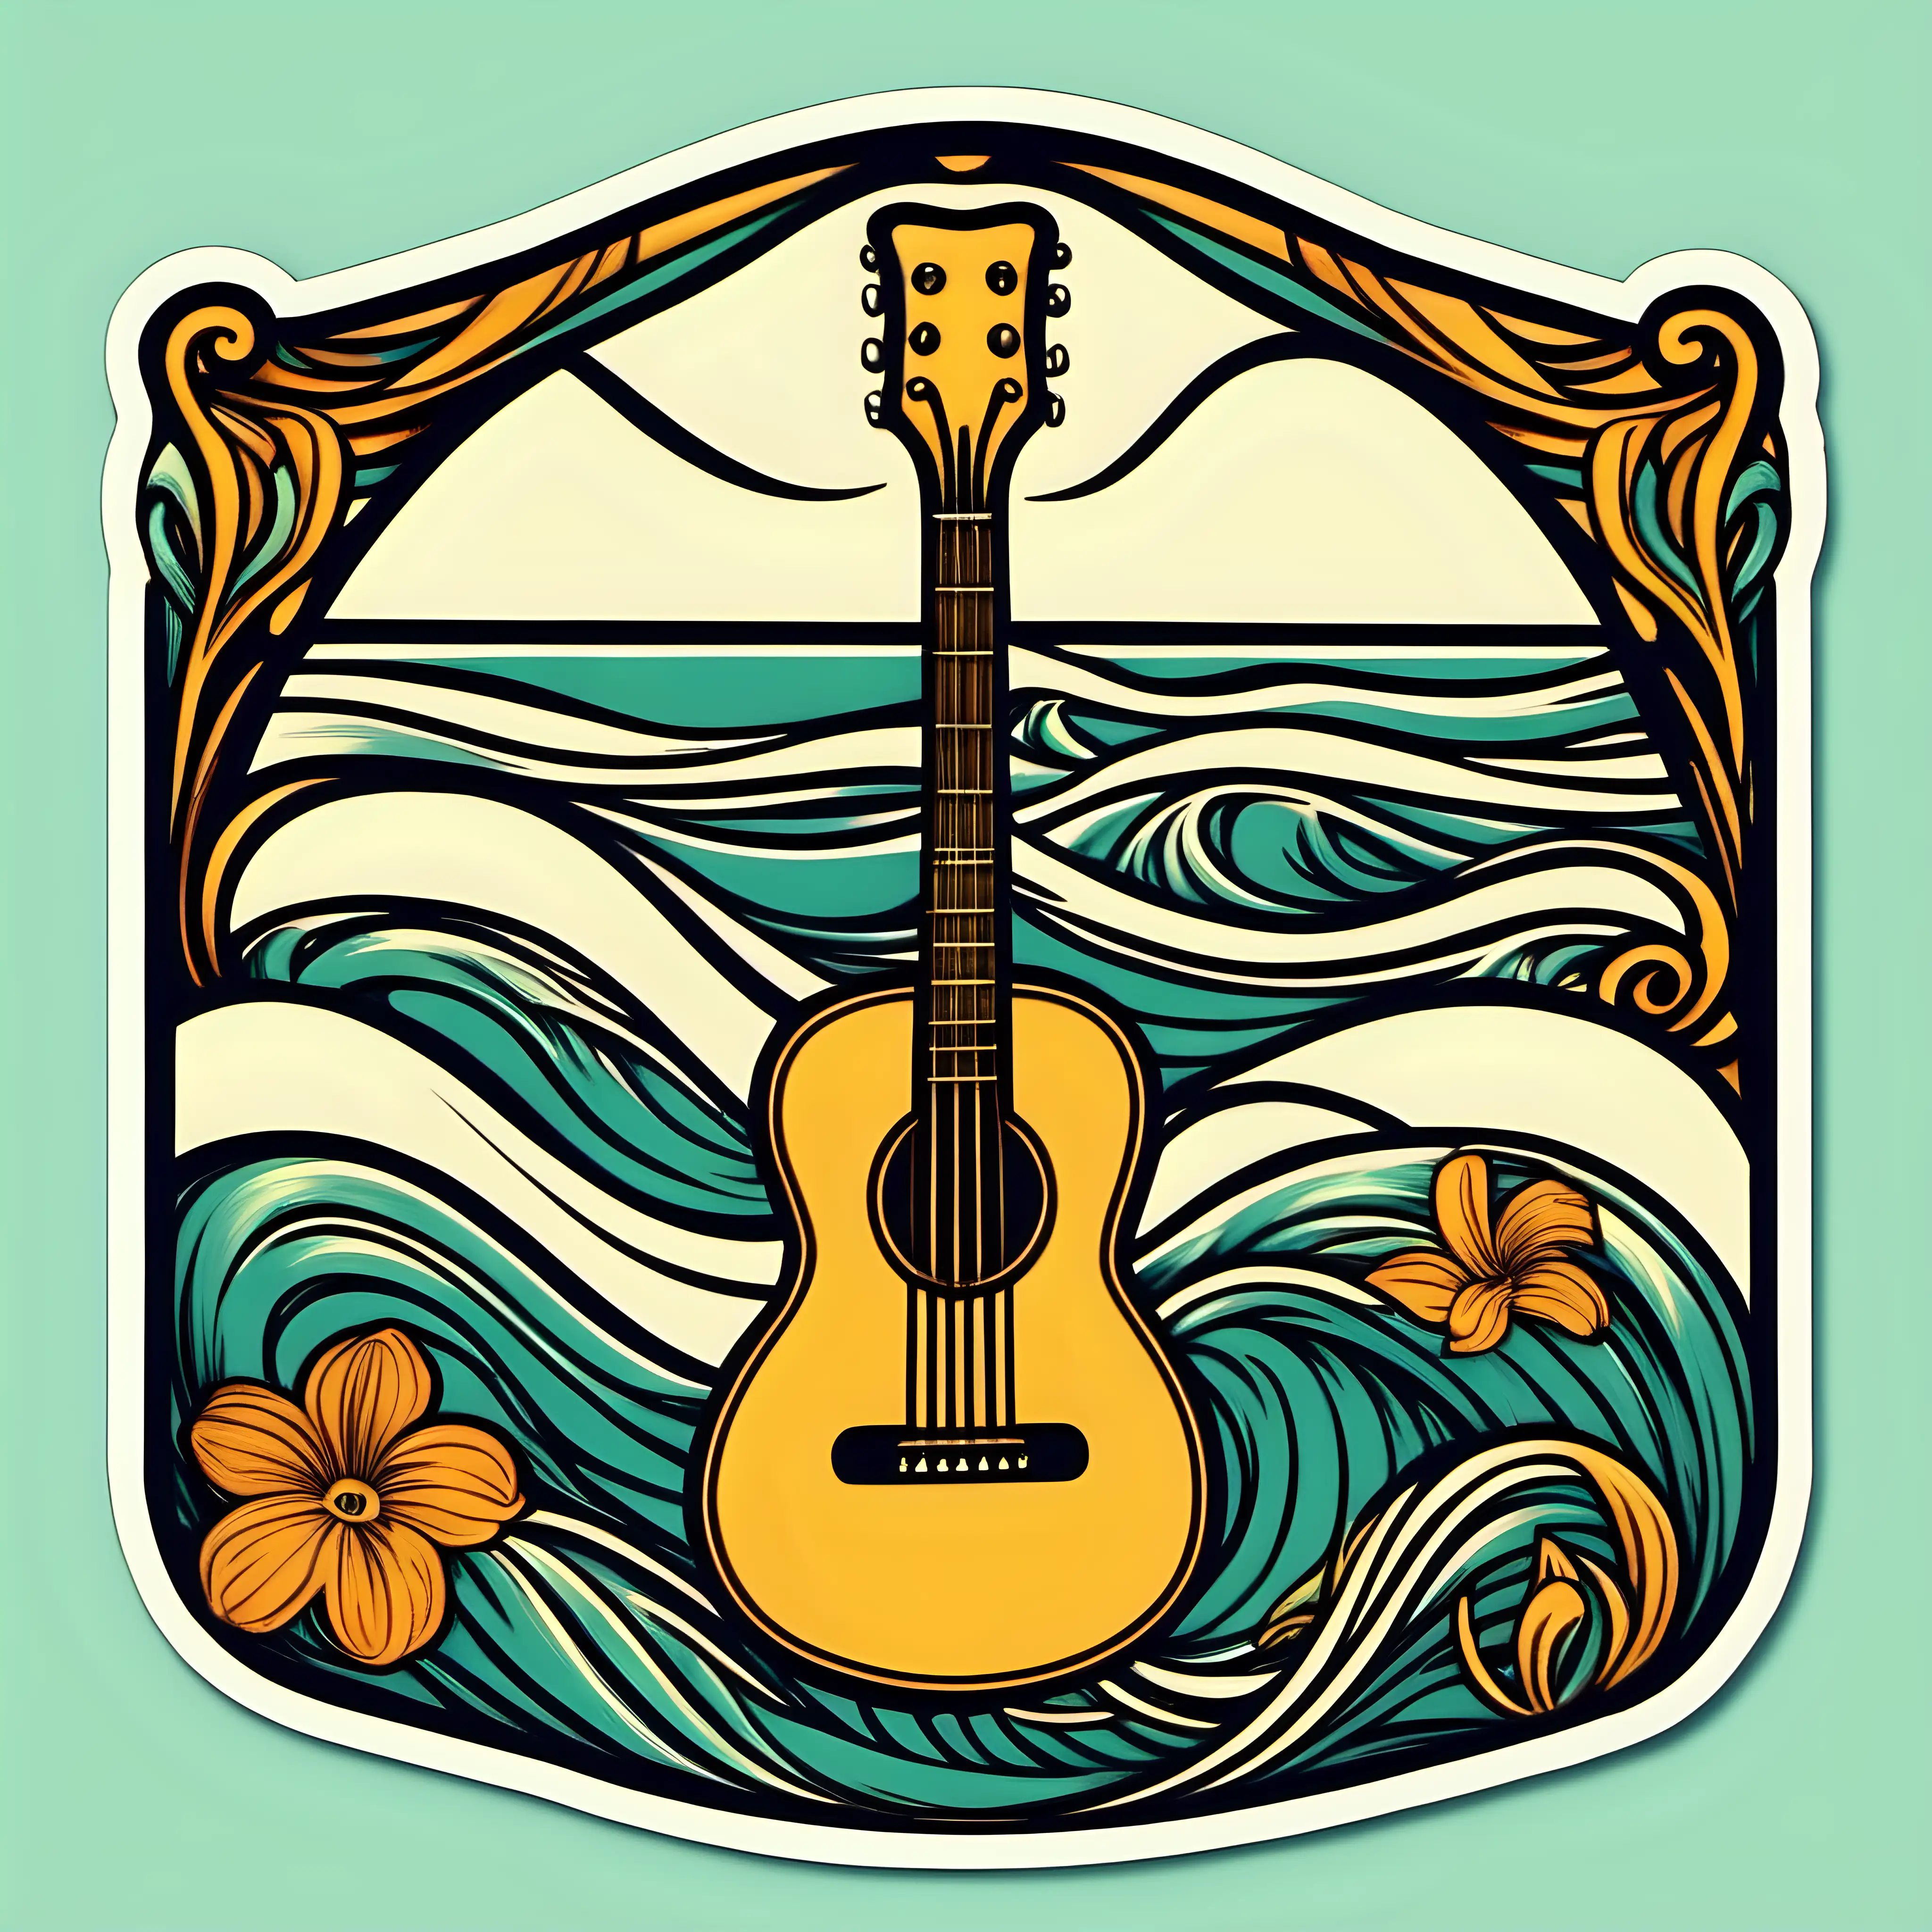 1960 art, image of a guitar,  waves and beach, Art Nouveau floral border, simplified, sticker
